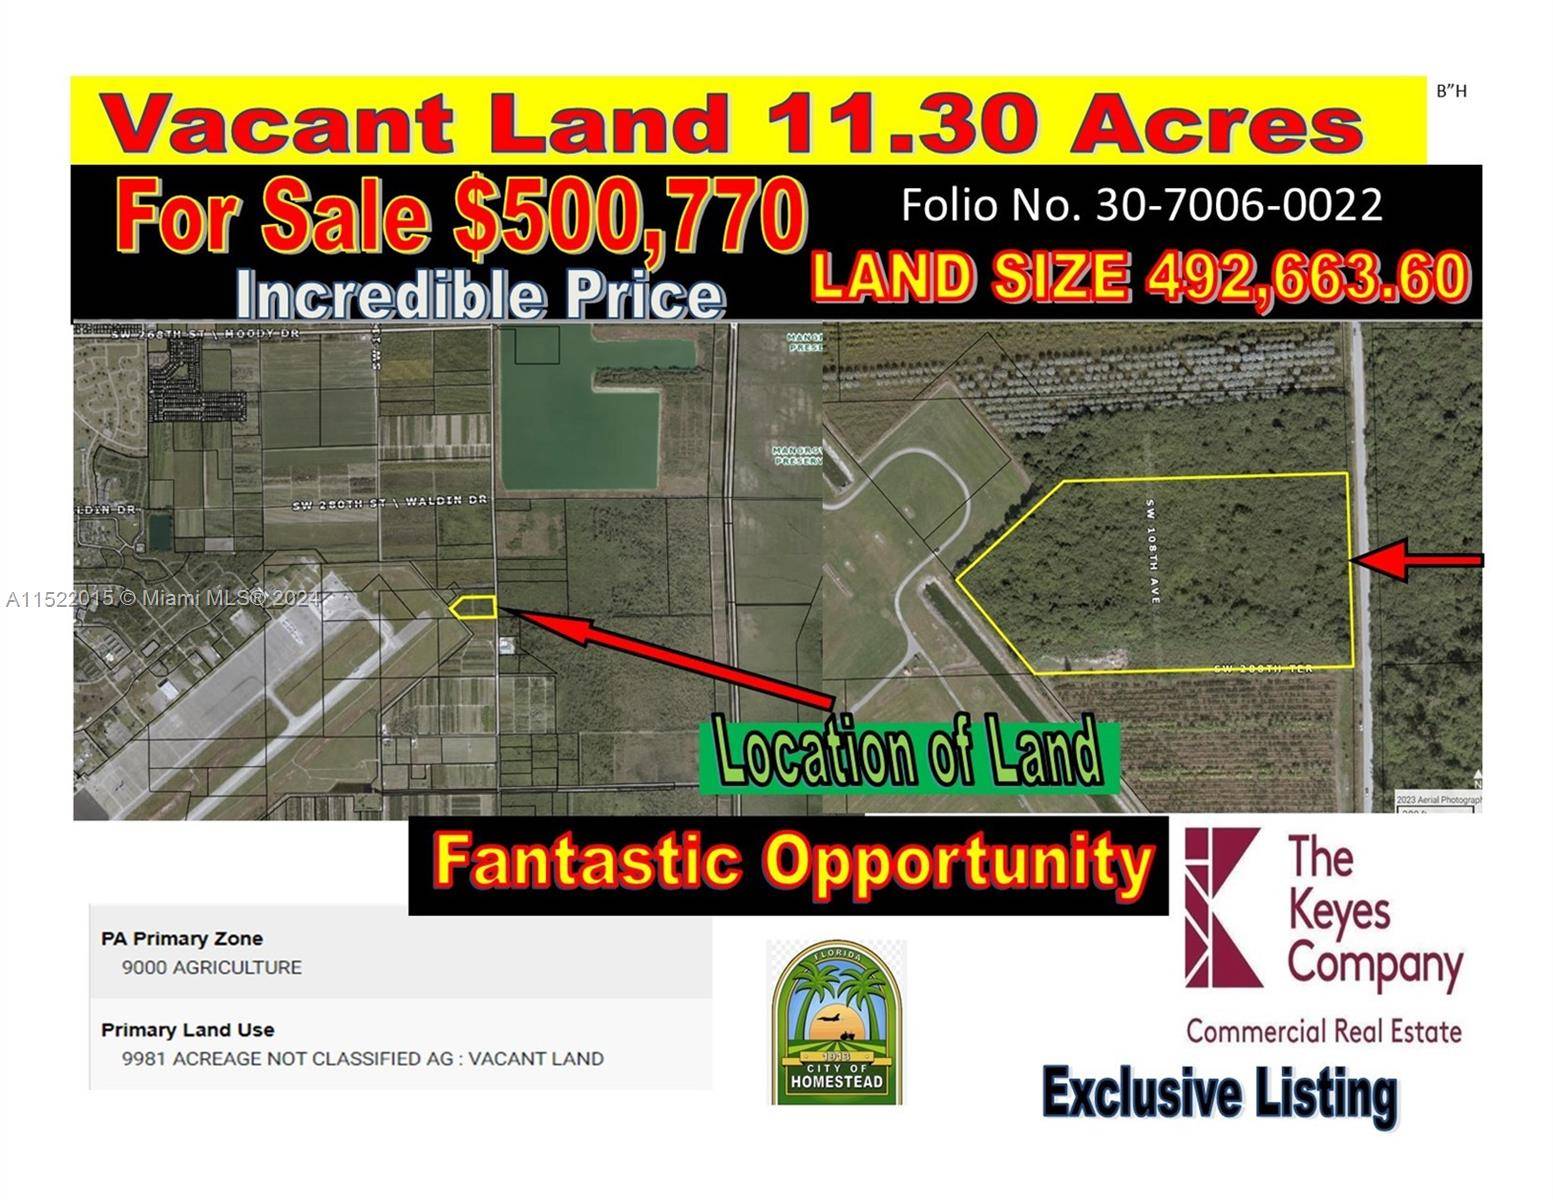 LAND 11. 31 ACRES 492, 663 SF WITH A PRIMARY ZONE 9000 AGRICULTURE PRIMARY LAND USE 9981 ACREAGE NOT CLASSIFIED AG VACANT LAND ALL OFFERS WILL BE CONSIDER